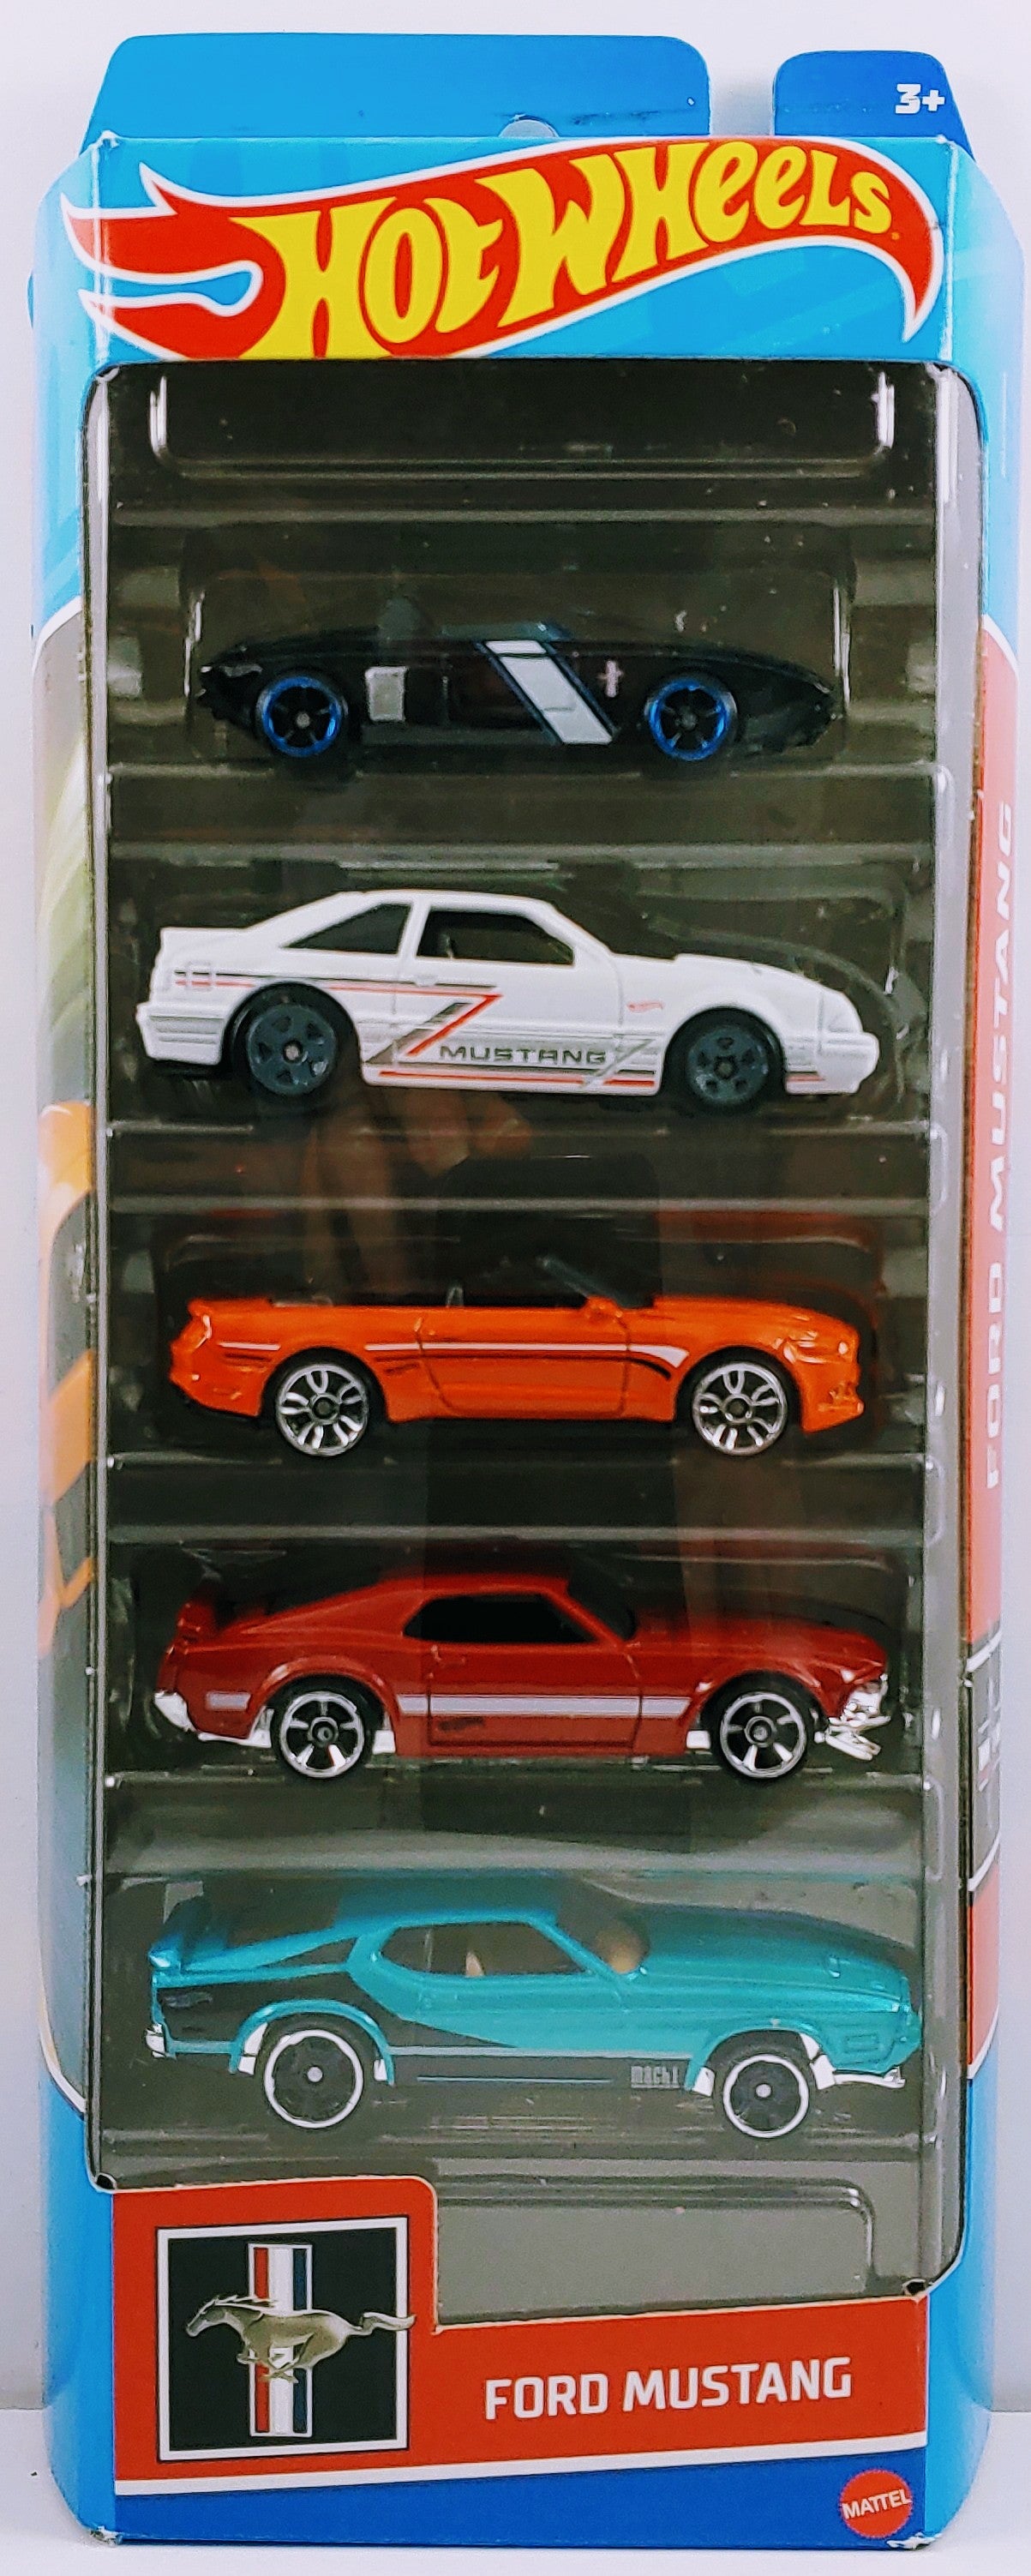 Hot Wheels 2022 - Gift Pack / 5 Pack - Ford Mustang - '62 Ford Mustang Concept, '92 Ford Mustang, 2015 Ford Mustang GT Convertible, '69 Ford Mustang Boss 302 & '71 Mustang MACH 1